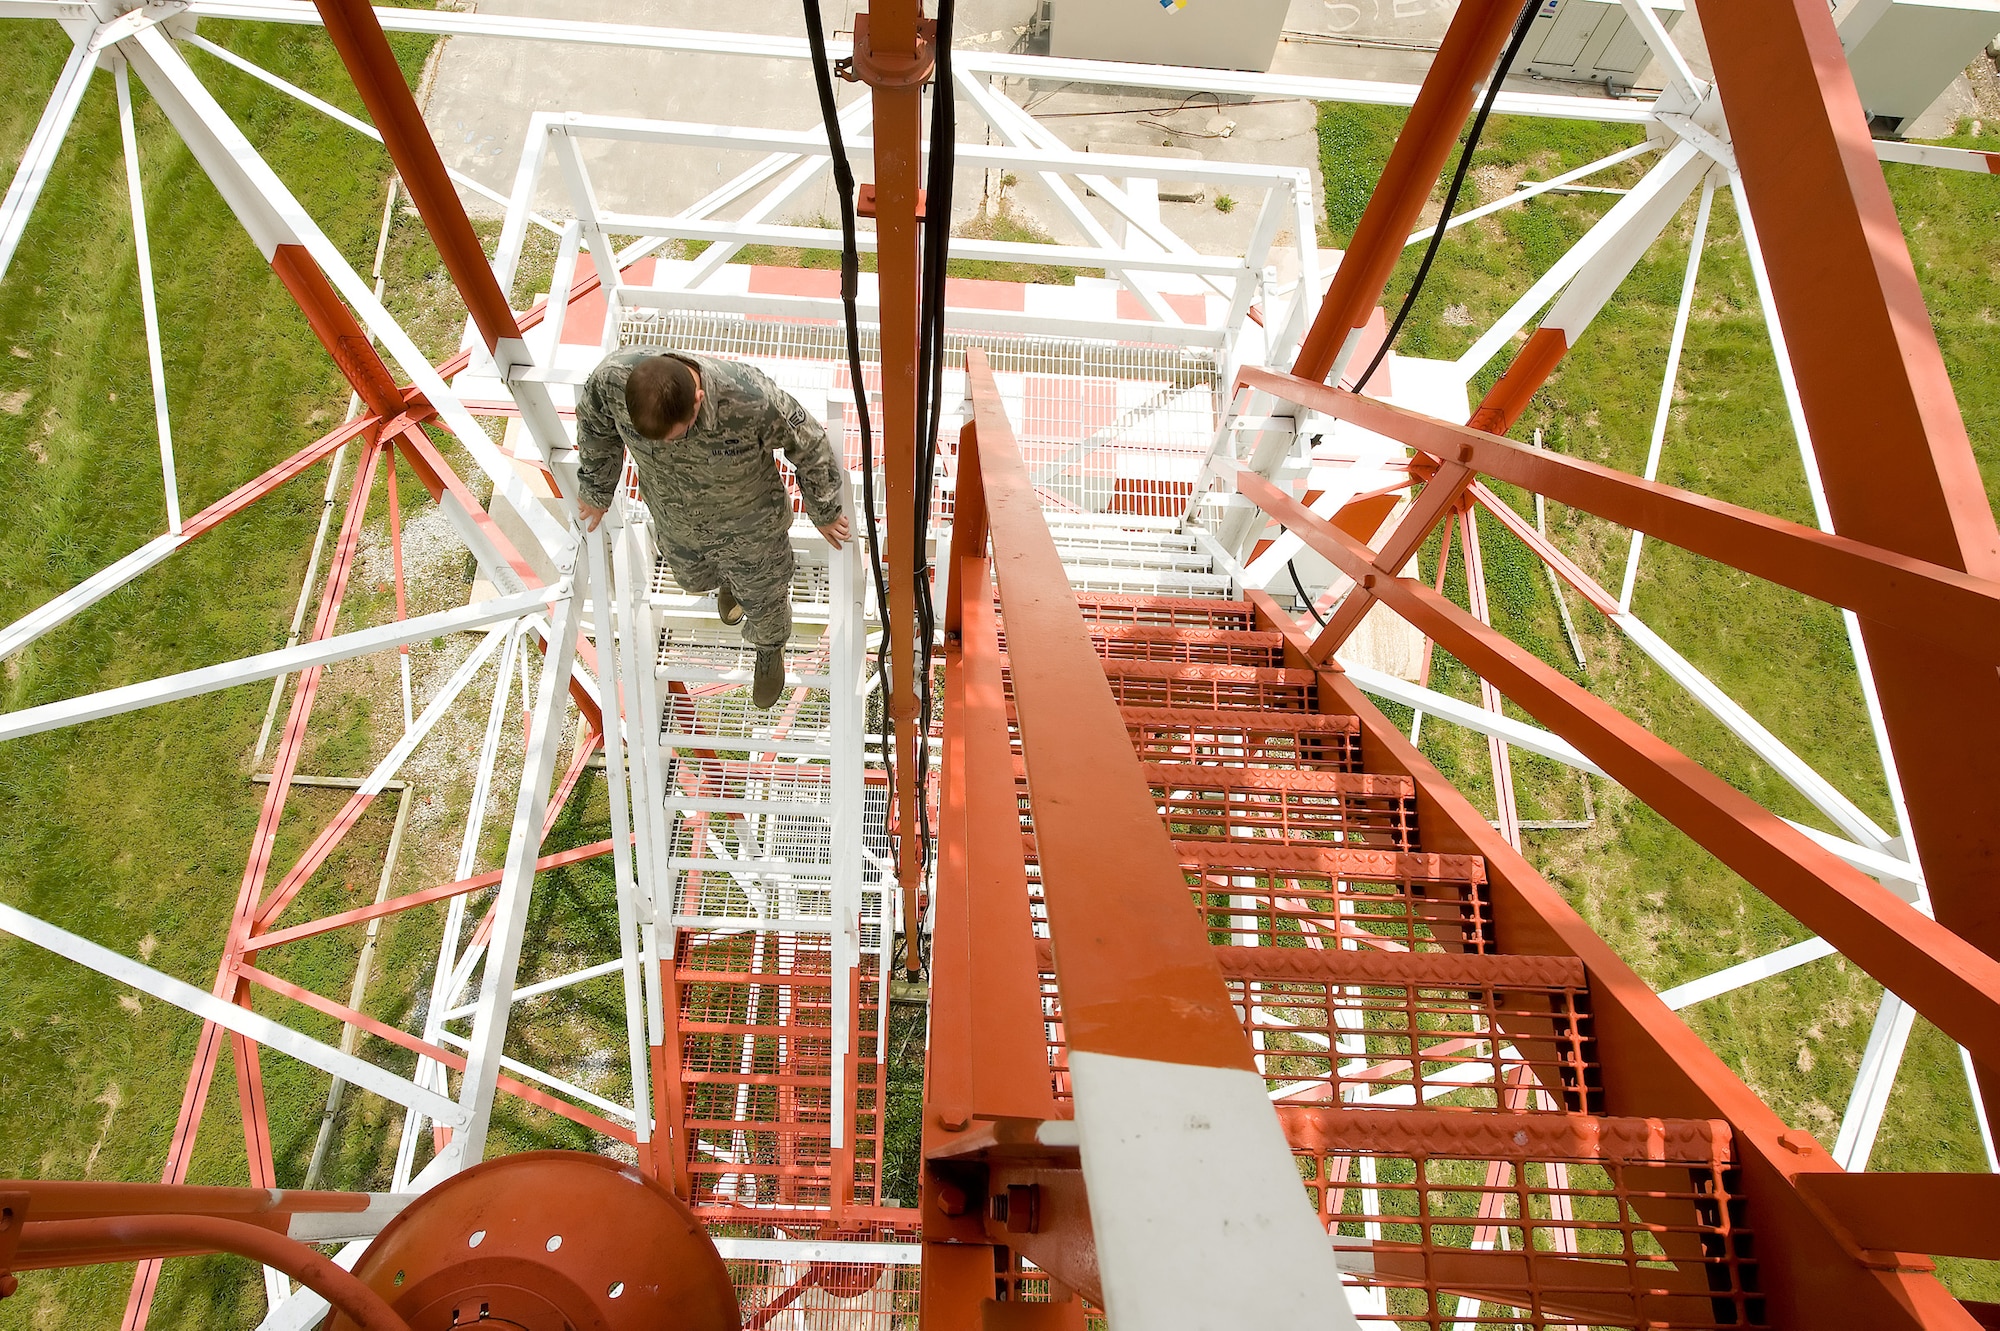 Staff Sgt. Josh Wilfong, 436th Communications Squadron ground radar systems technician, descends the radar tower after performing required daily inspections. (Air Force photo/ Jason Minto)